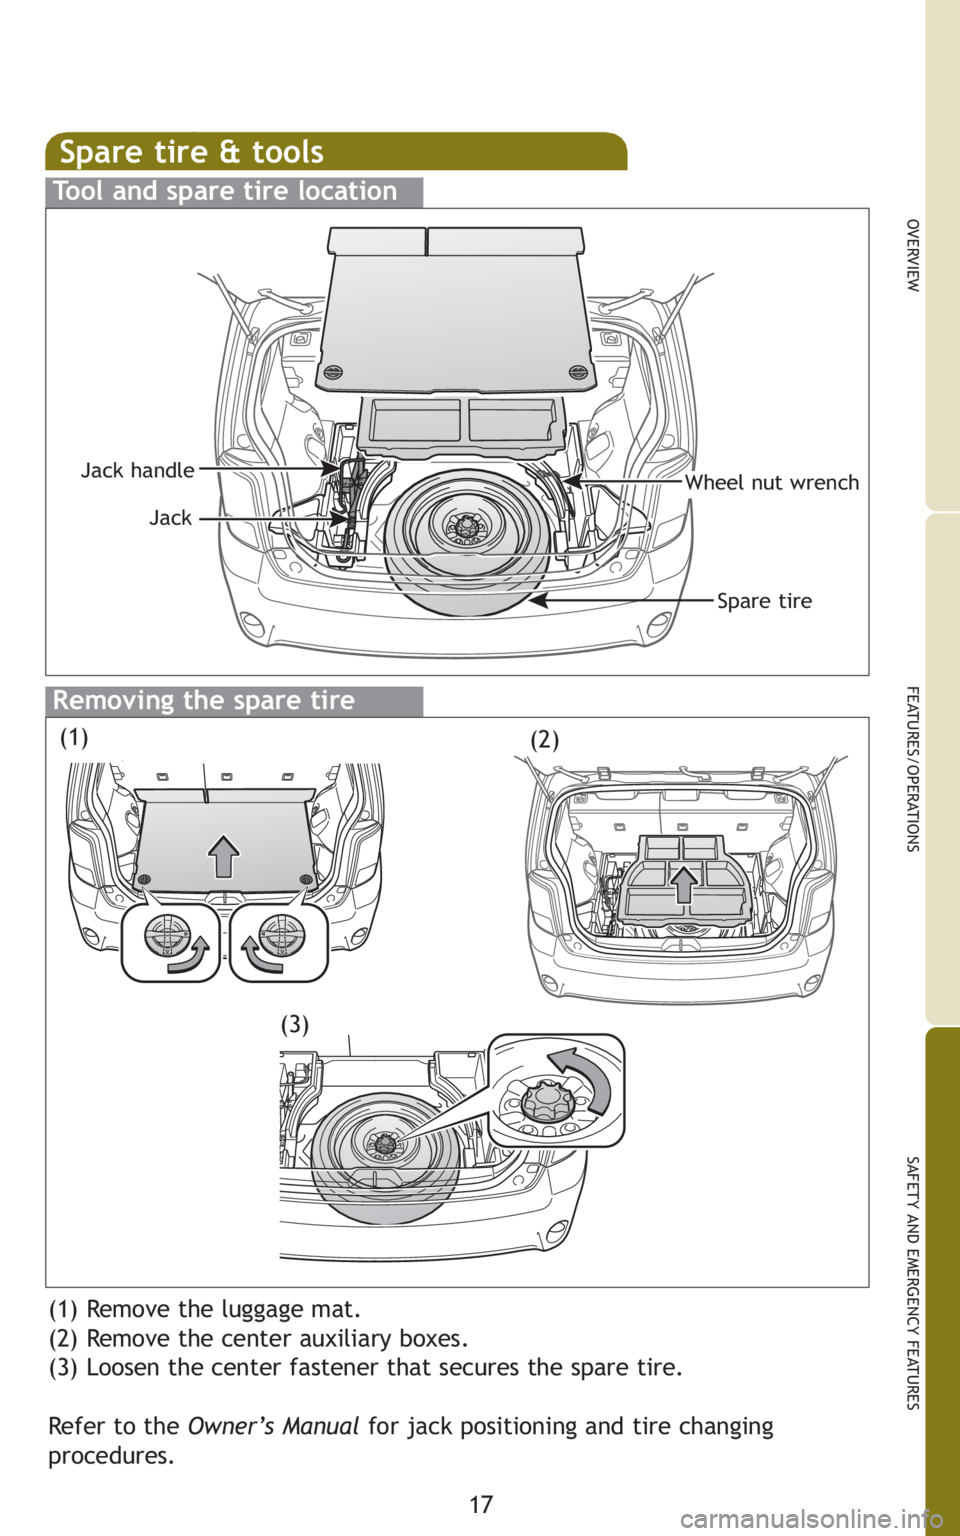 TOYOTA xB 2011  Owners Manual (in English) 17
OVERVIEW
FEATURES/OPERATIONS
SAFETY AND EMERGENCY FEATURES
Spare tire & tools
Tool and spare tire location
Removing the spare tire
(1) Remove the luggage mat.
(2) Remove the center auxiliary boxes.